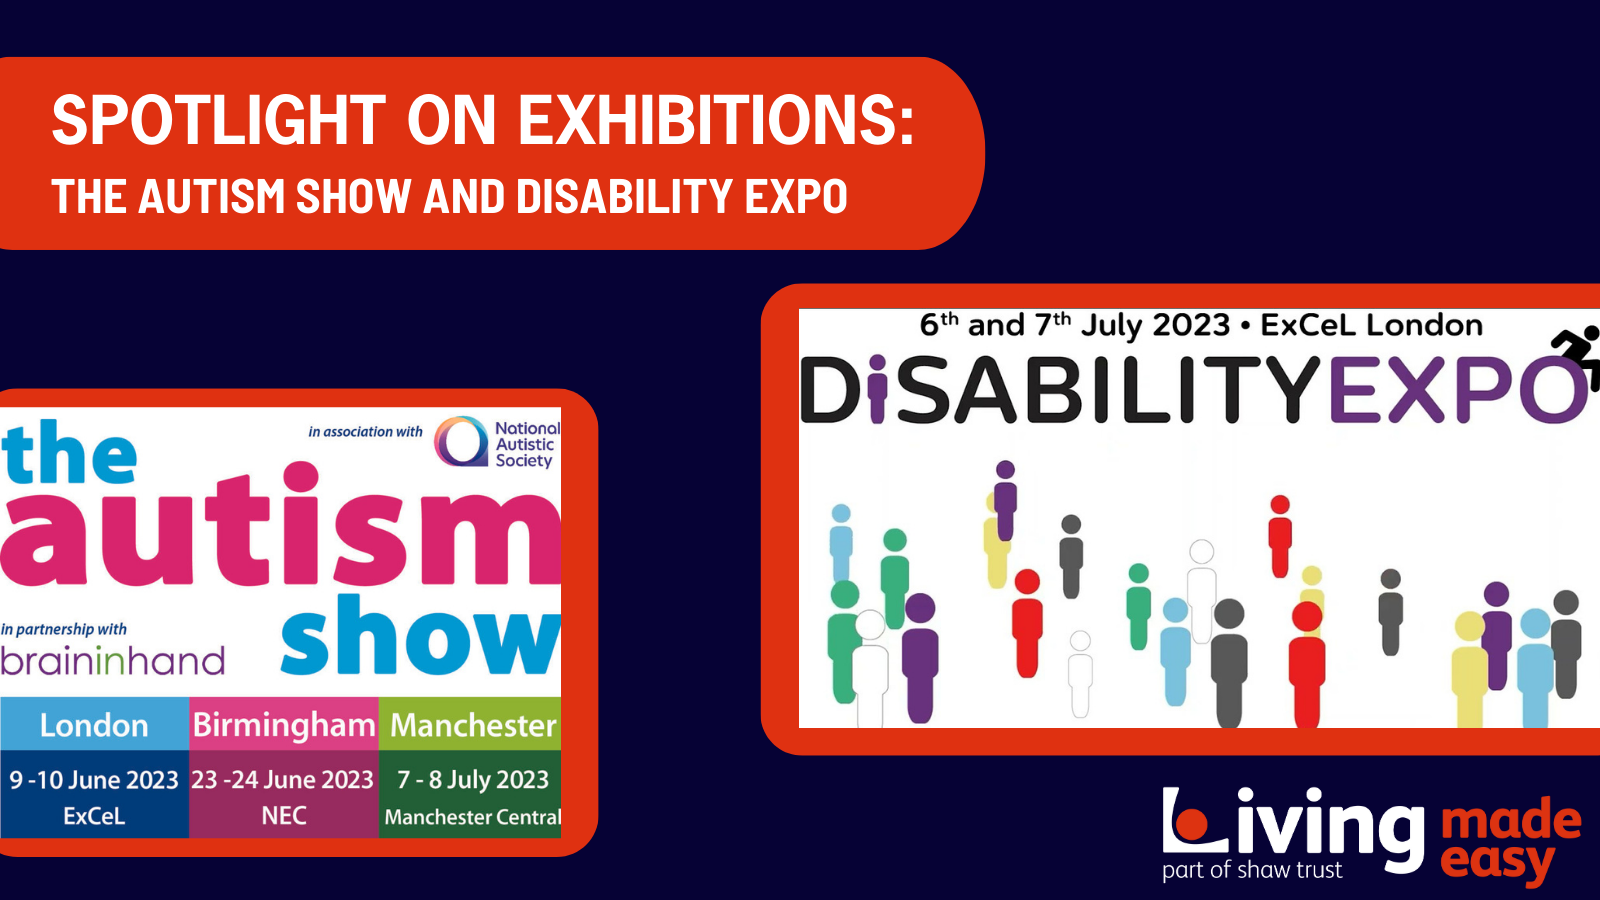 A banner image with two logos for the Autism Show and Disability Expo. The banner image reads Spotlight on Exhibitions: The Autism Show and Disability Expo